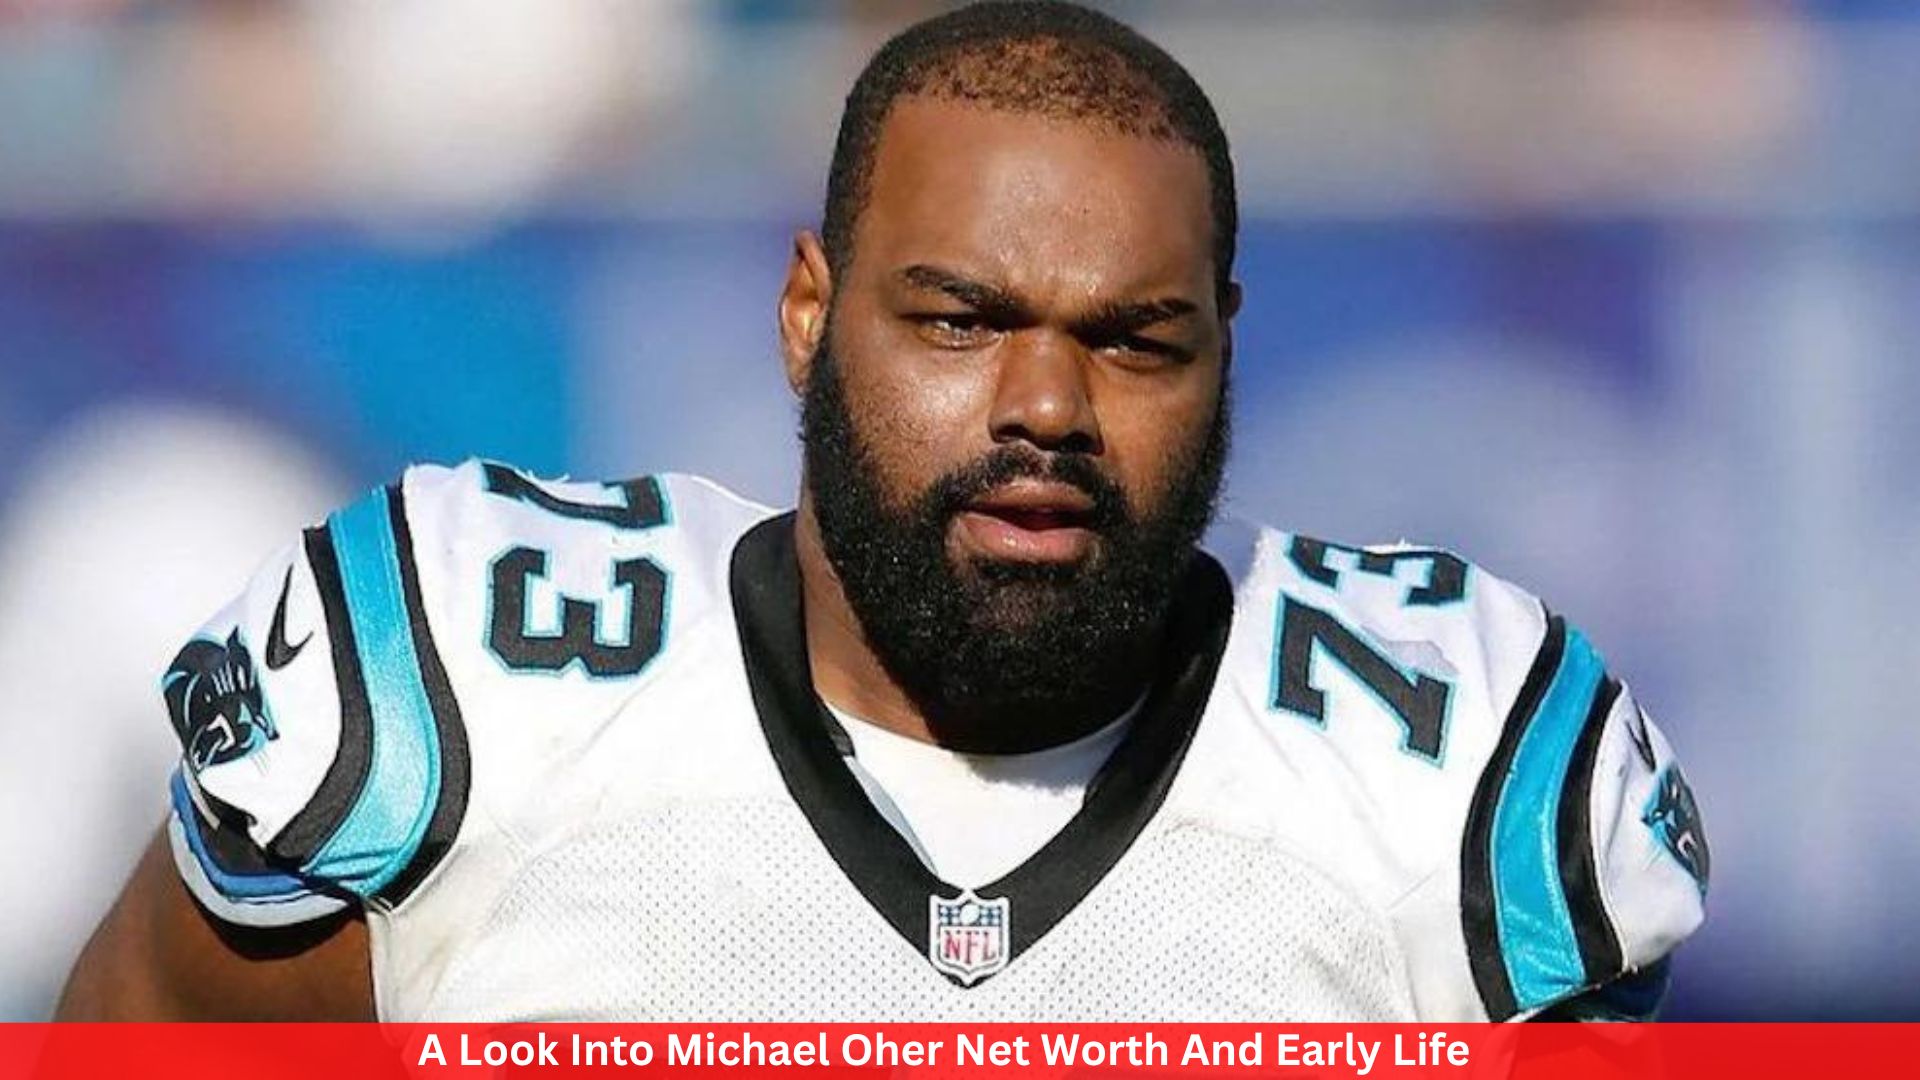 A Look Into Michael Oher Net Worth And Early Life